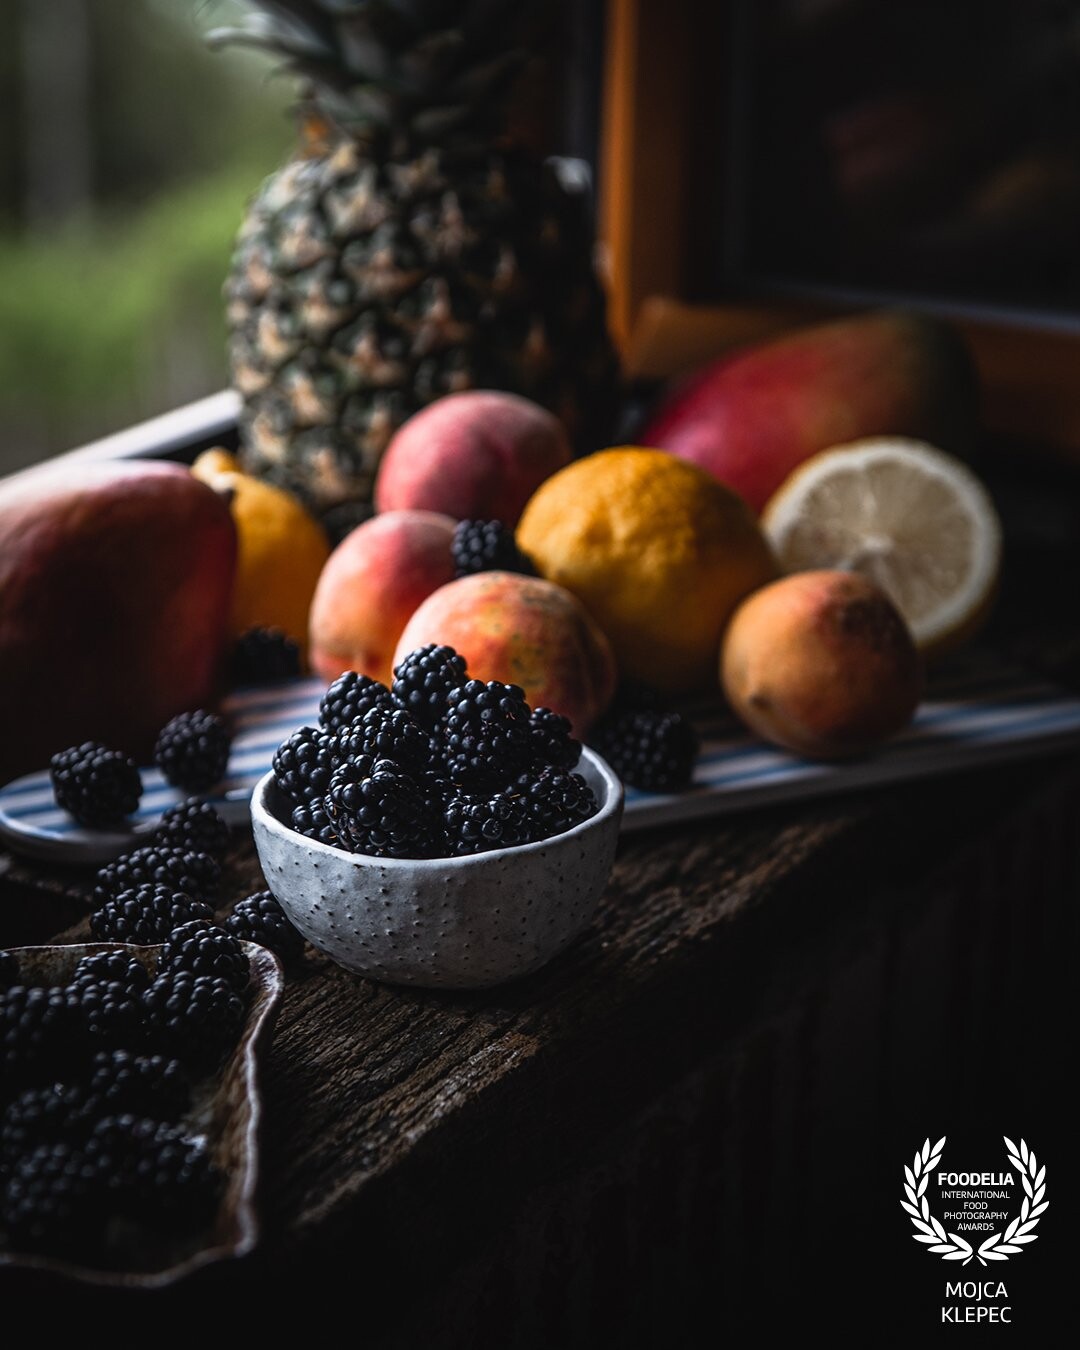 An abundance of fruit on the window's shelf in a beautiful house on the hill. <br />
It was a beautiful rainy day, perfect for moody captures.